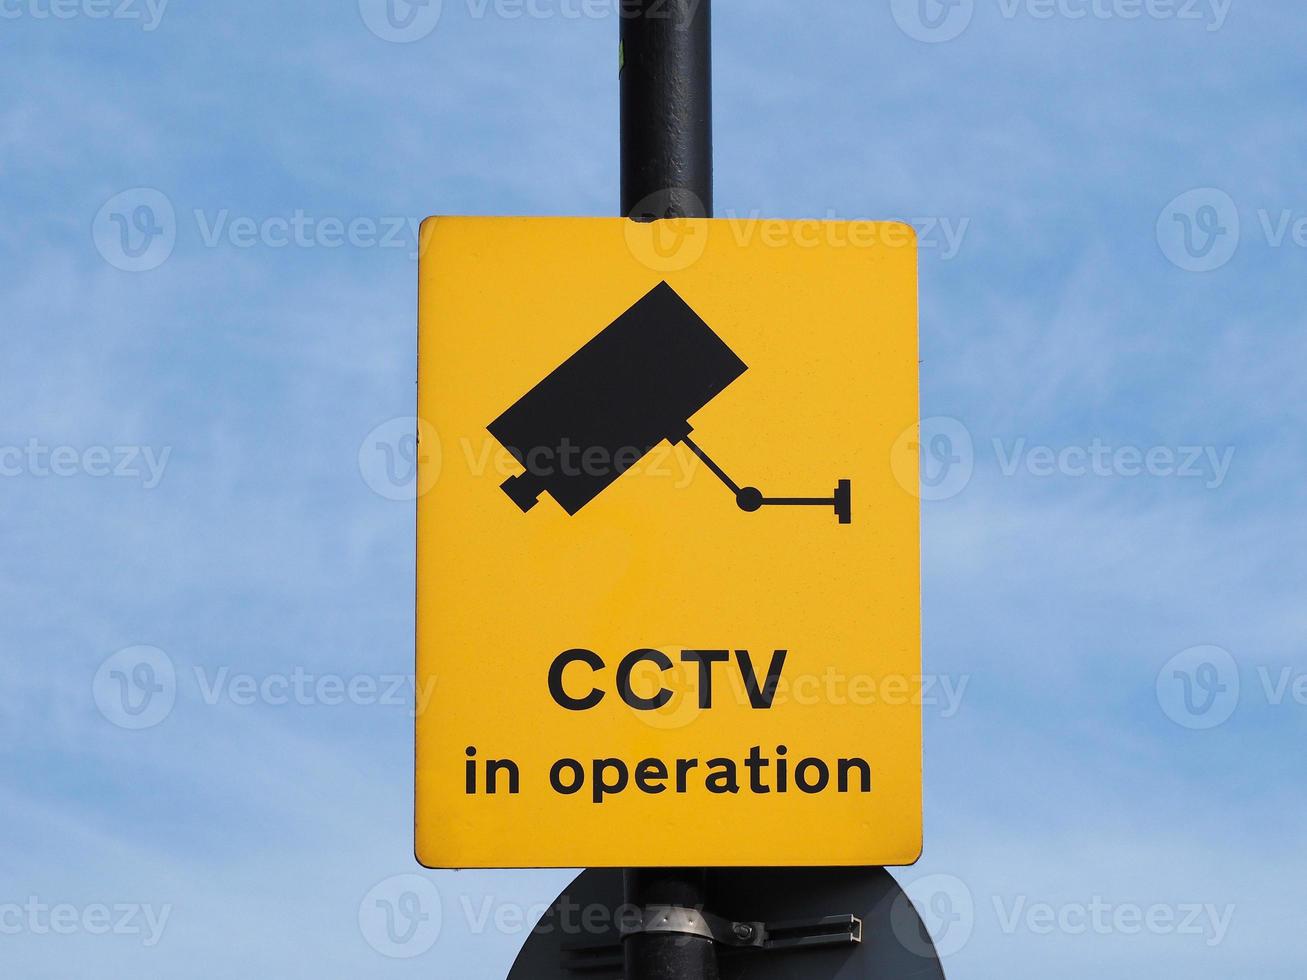 CCTV in operation sign photo